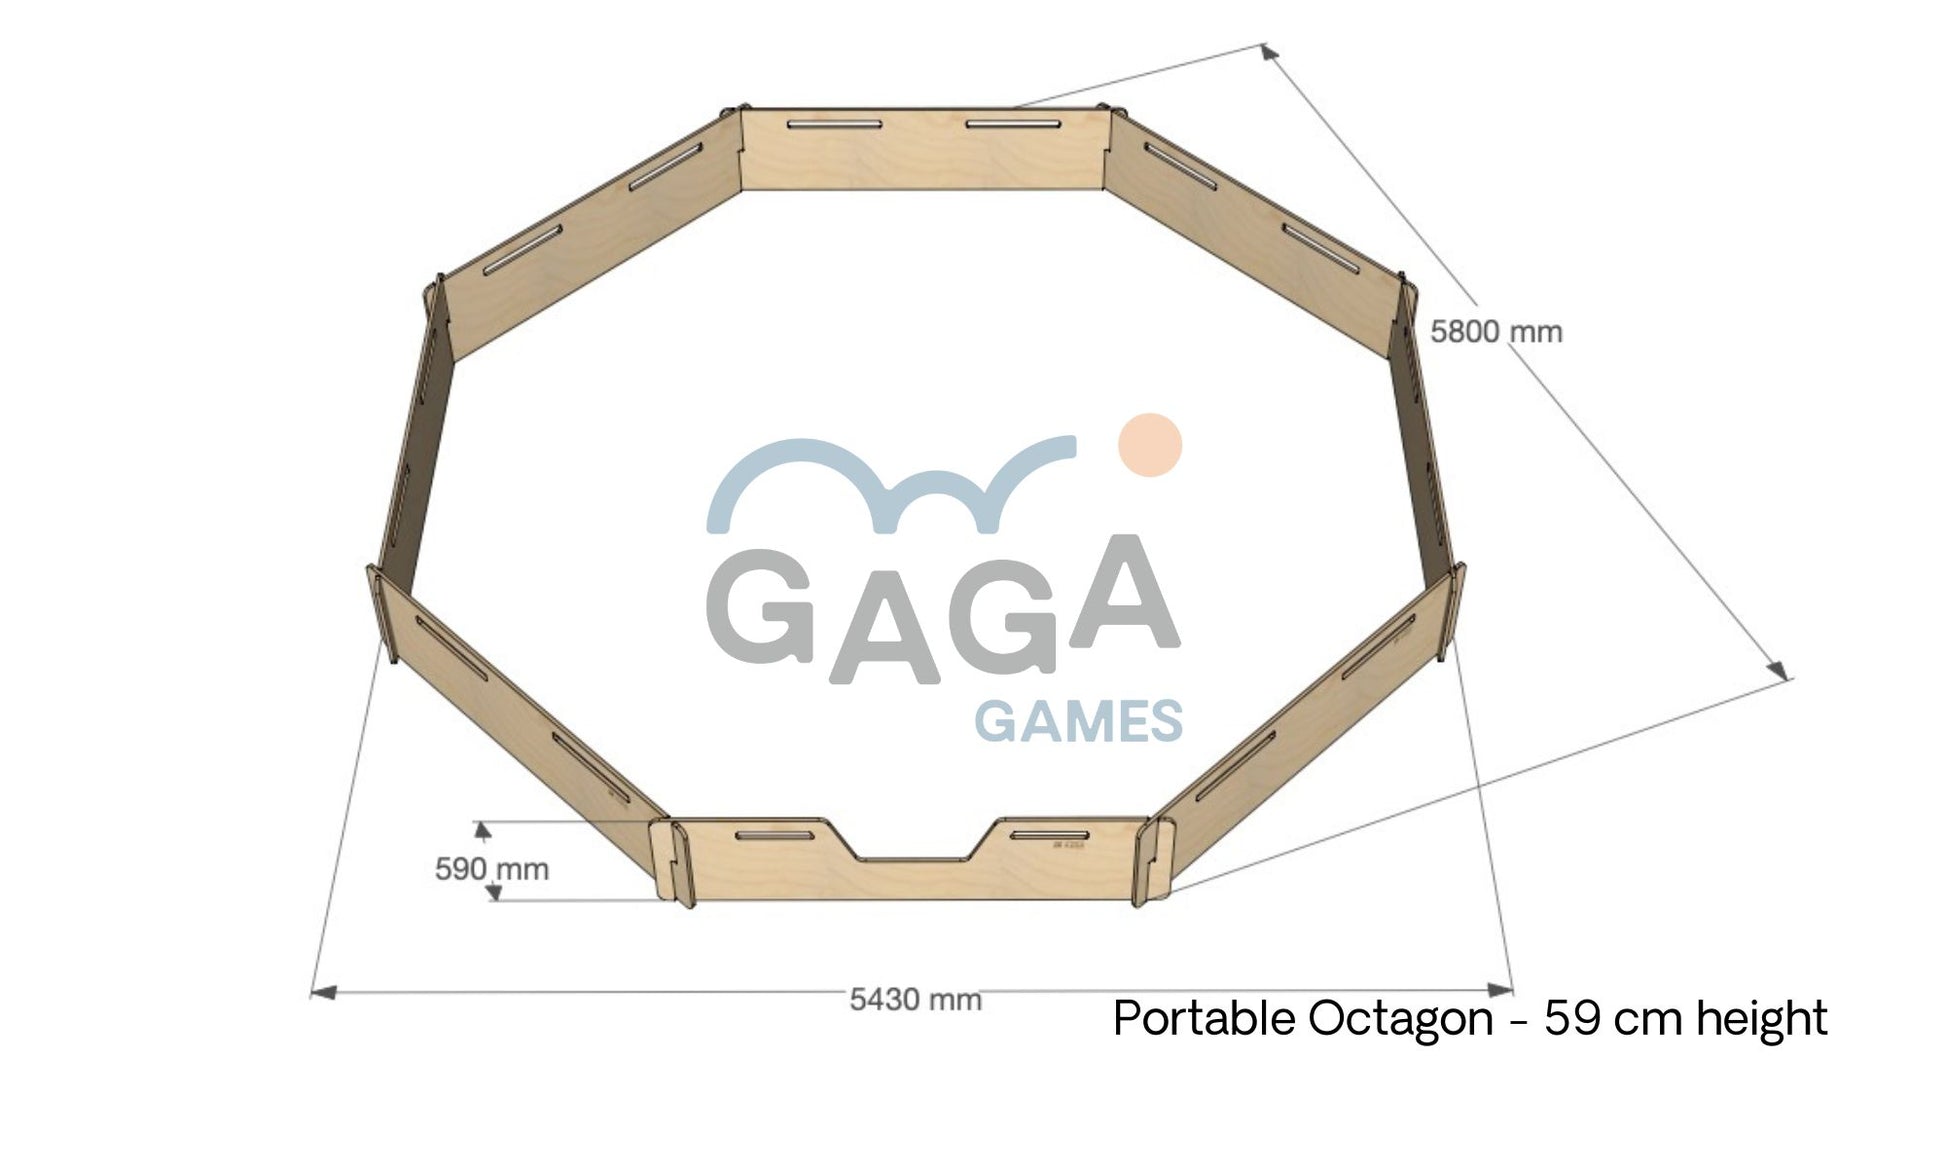 Dimensions of our 59cm Portable Octagonal Gaga Pit. 